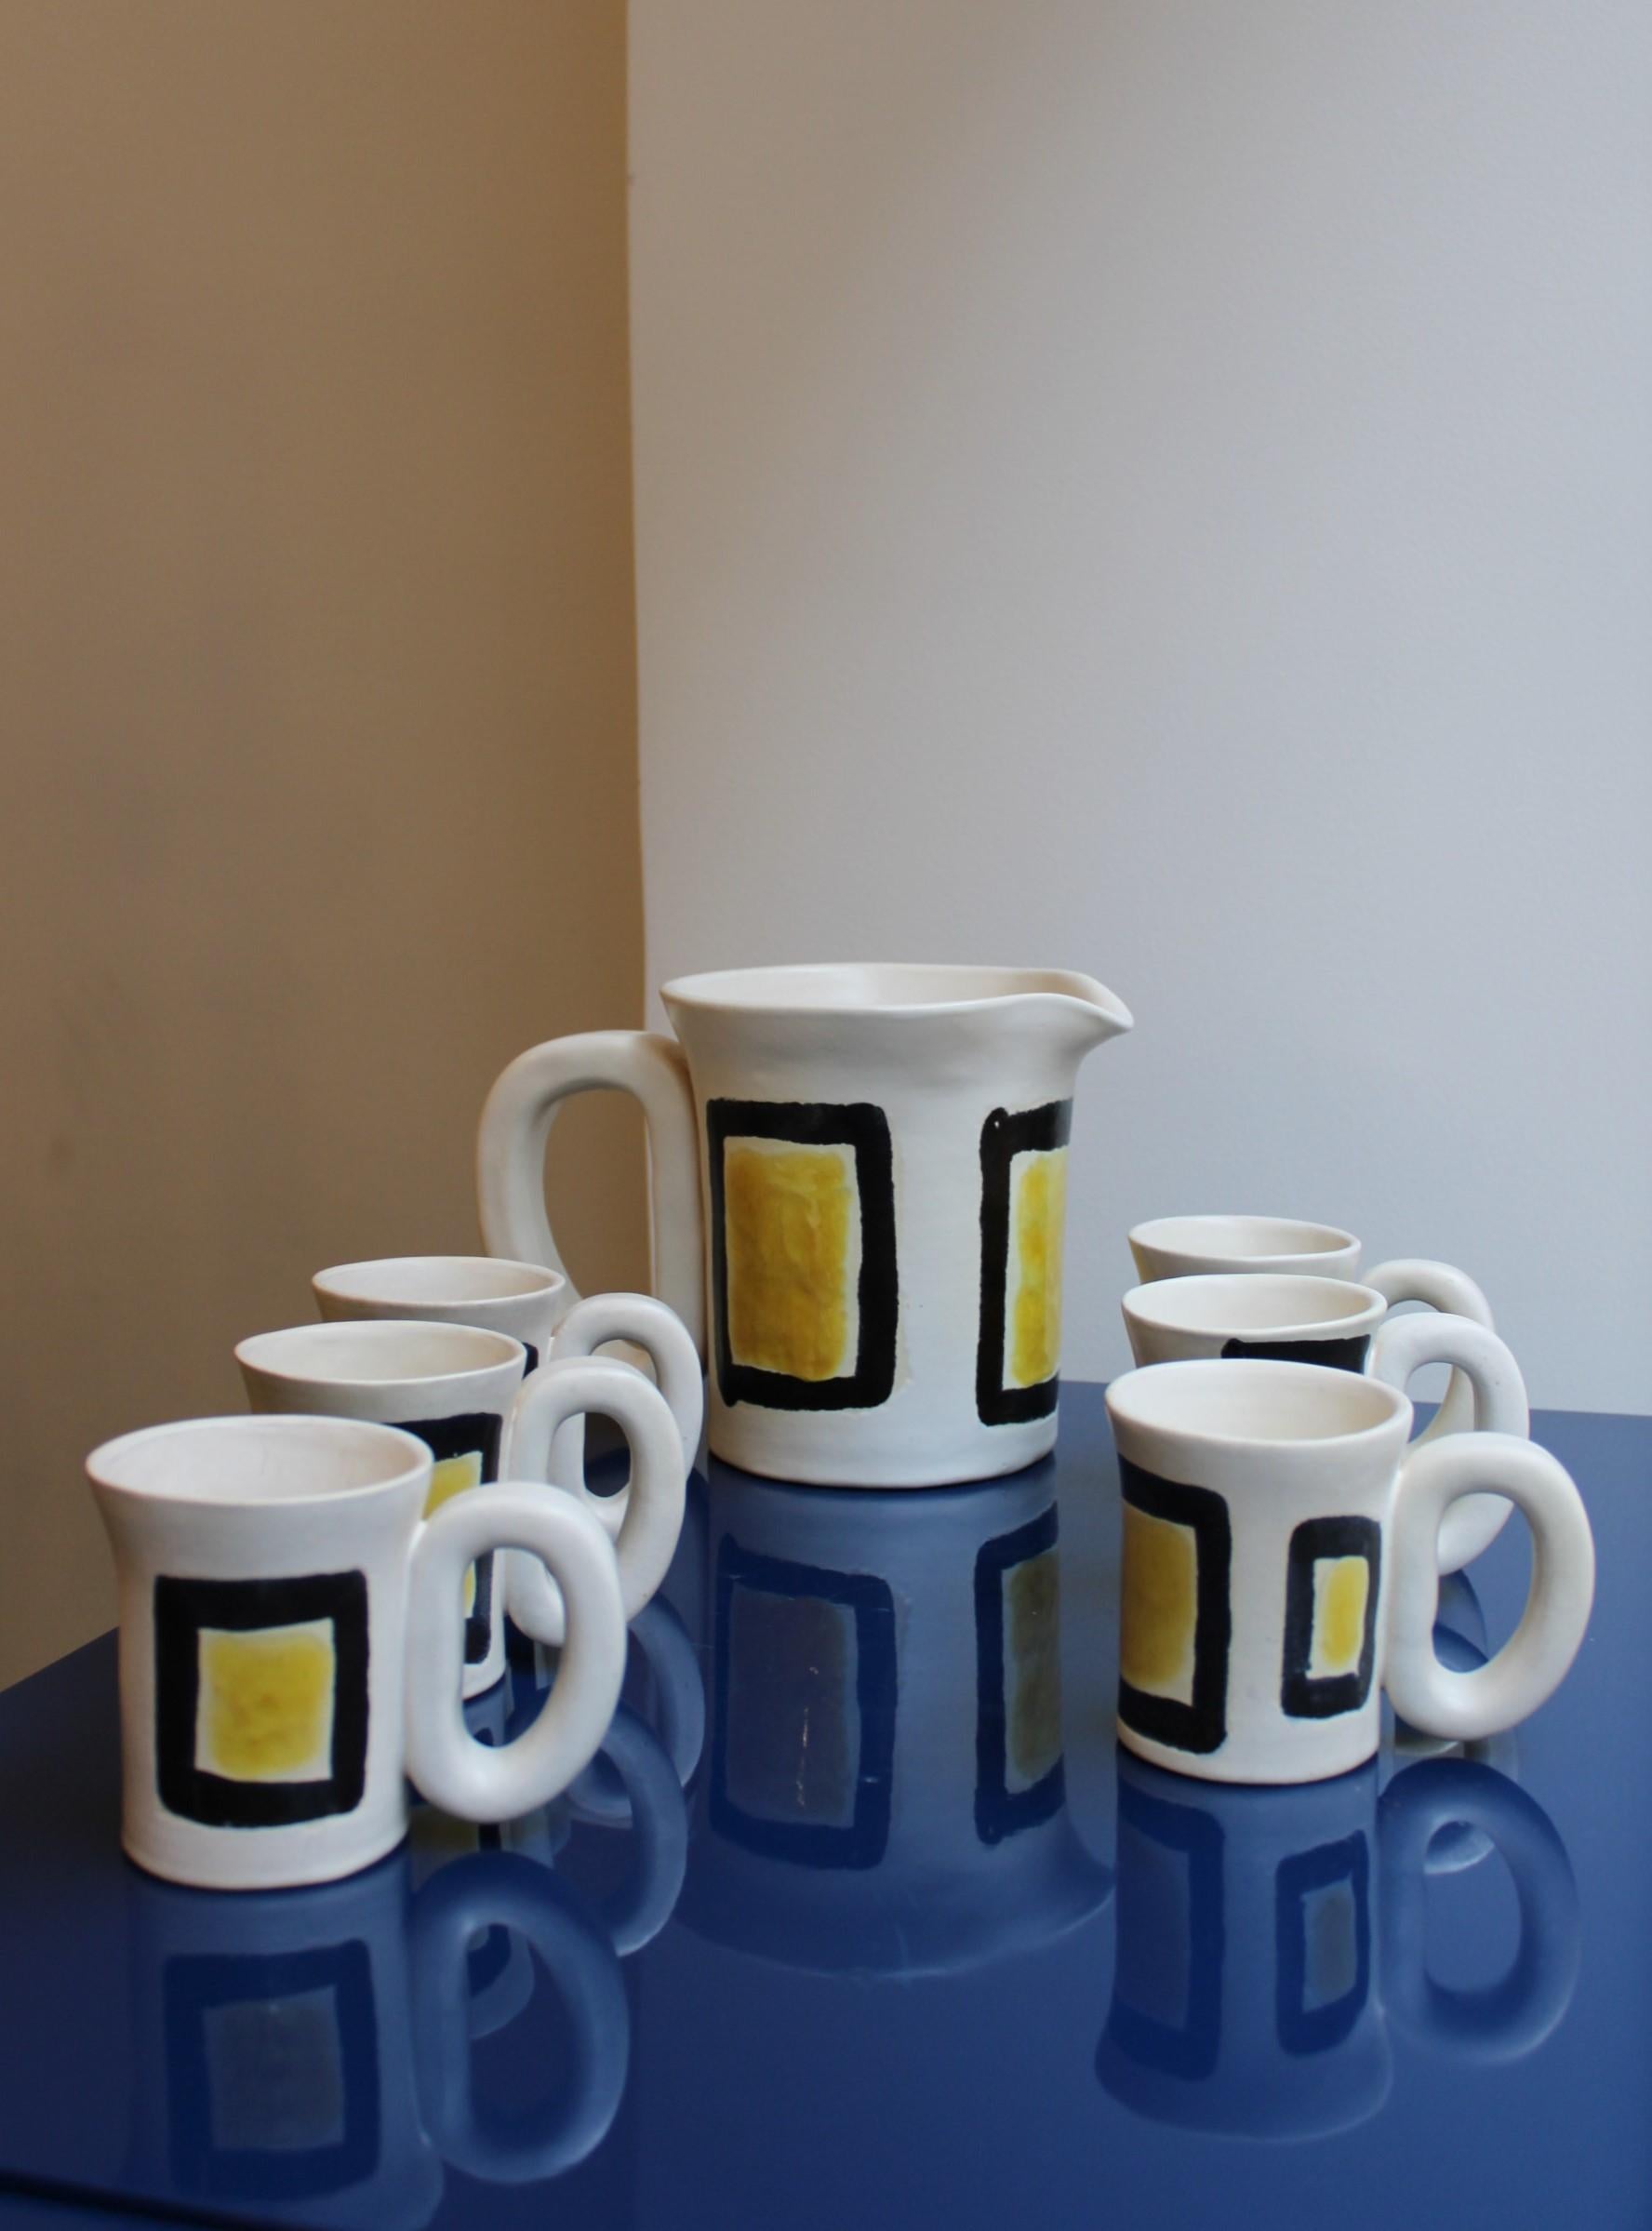 Ceramic set by Jean and Robert Cloutier
Signed under the bases
France, 20th century

Pitcher dimensions : 25 x 16 x 17 cm
Mug dimensions : 12.5 x 8 x H 9 cm